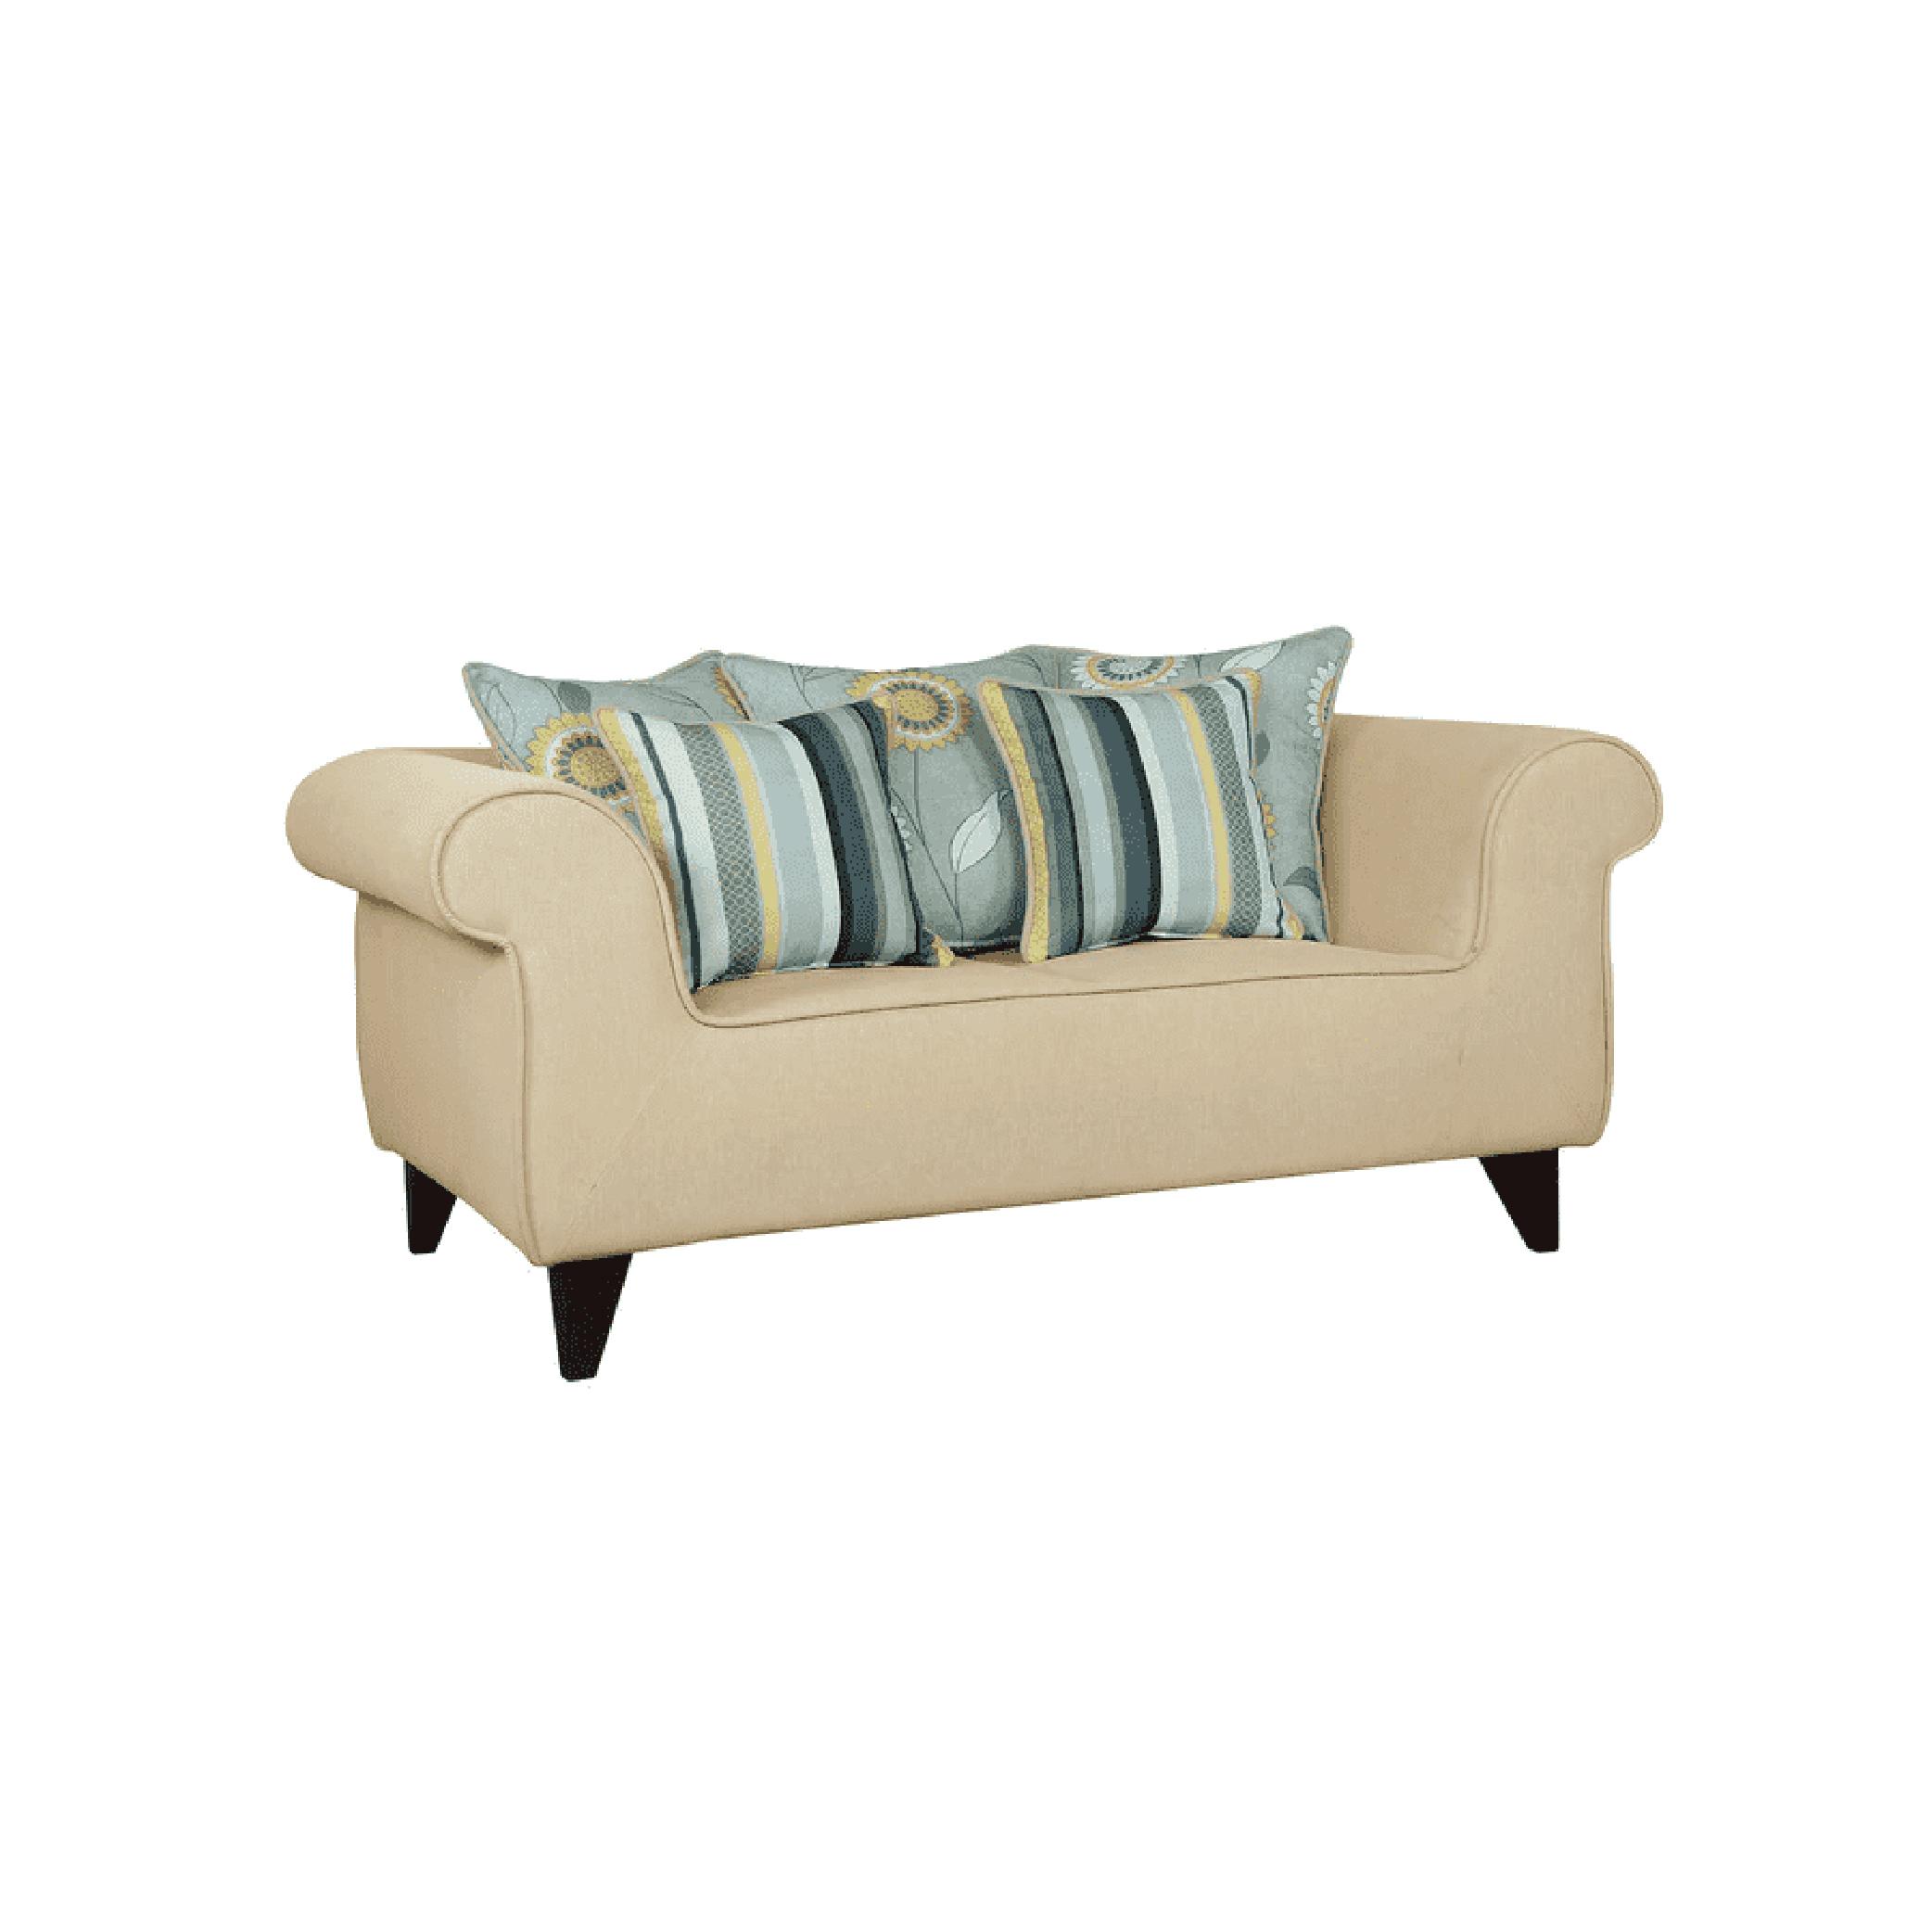 Salerno Two Seater Sofa in Beige Colour